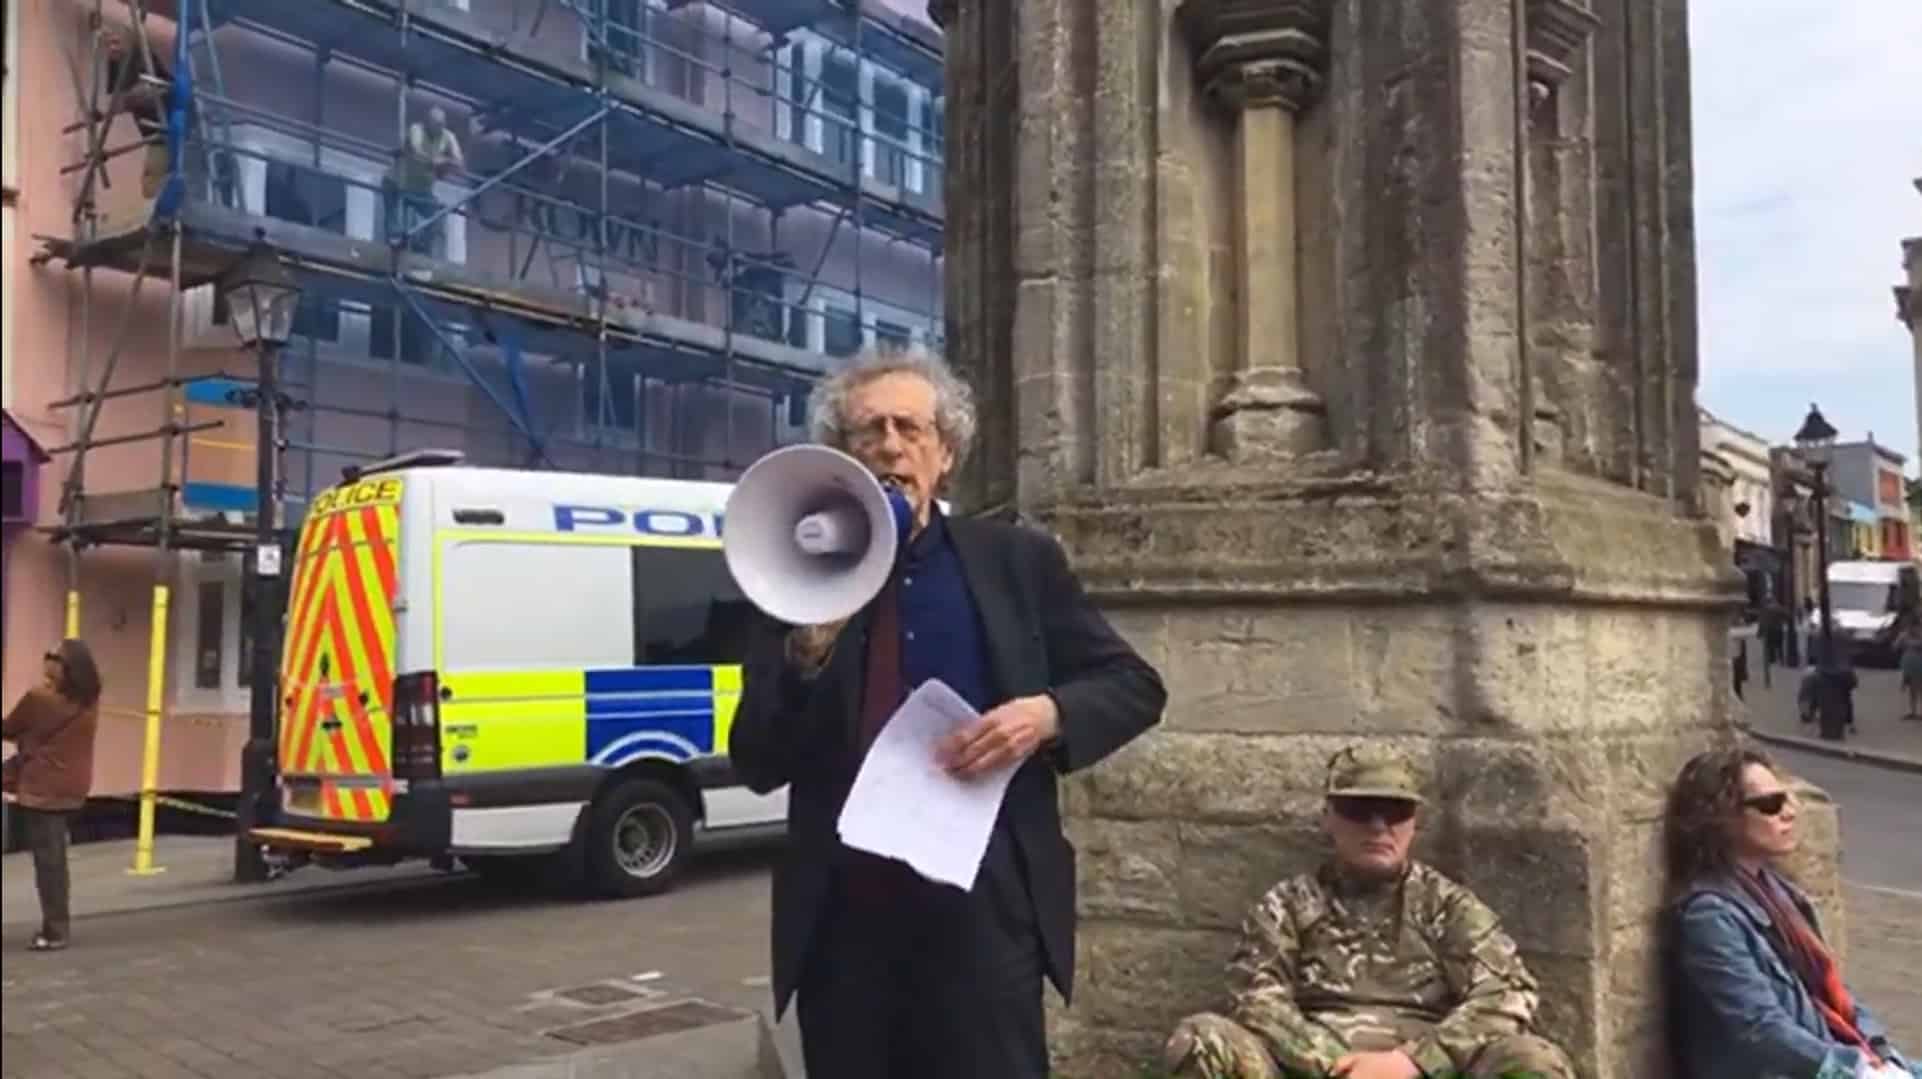 Piers Corbyn delivering a speech protesting against lockdown